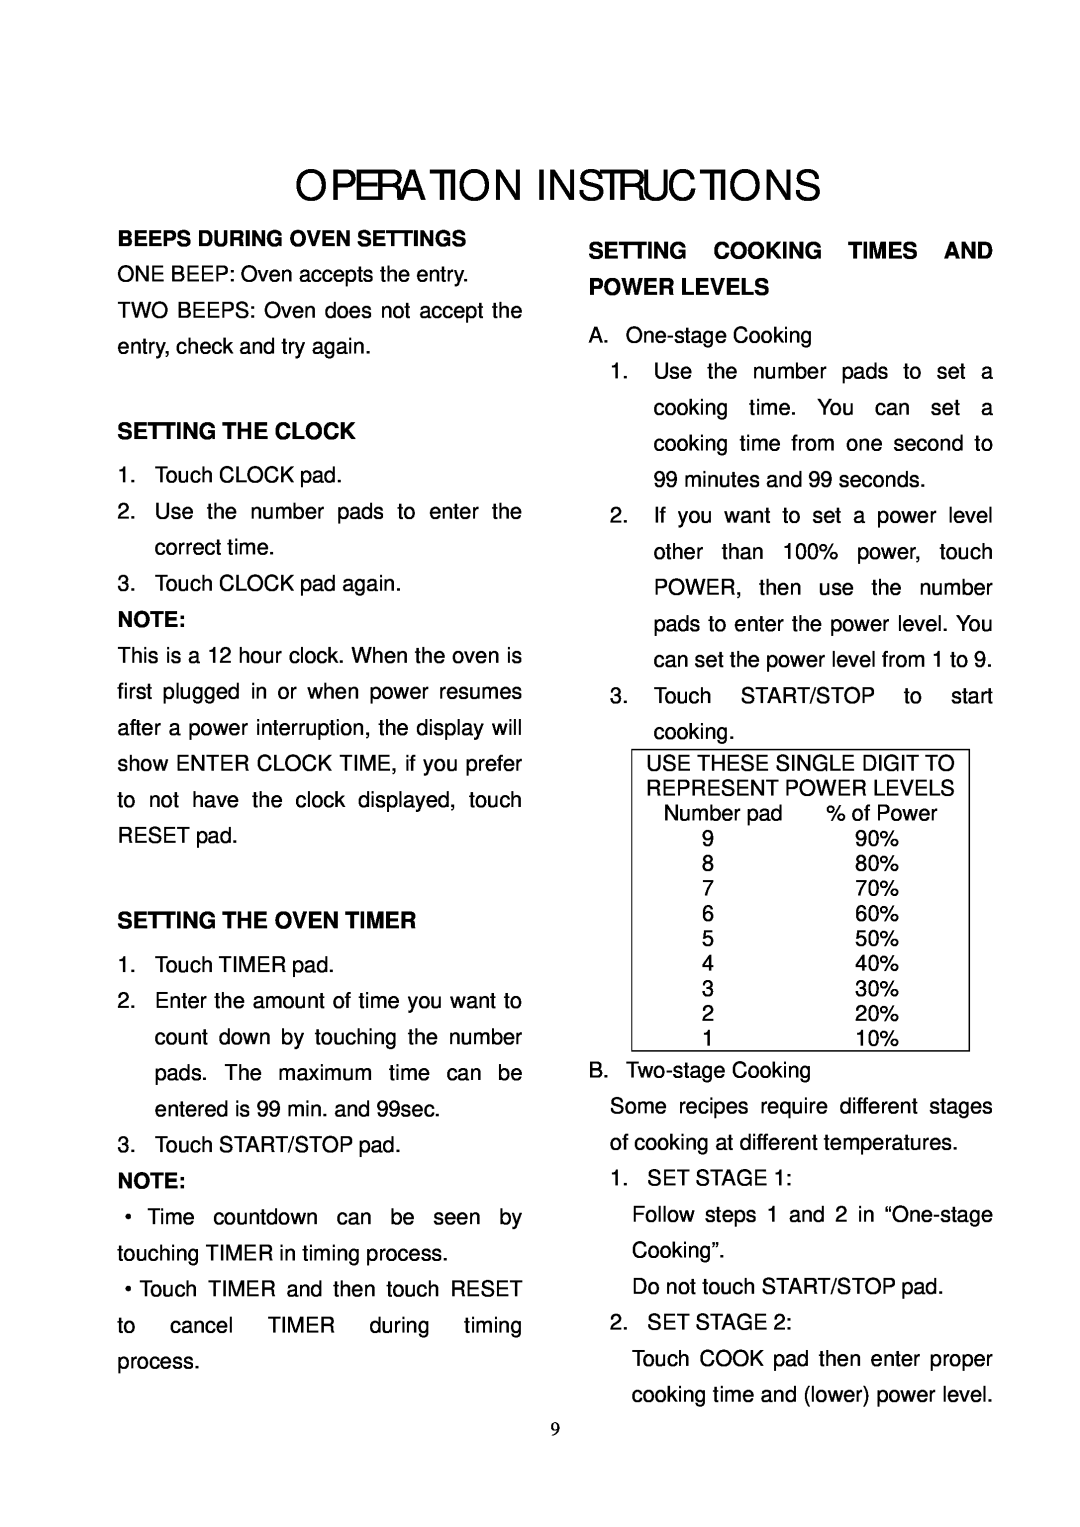 RCA RMW768 Operation Instructions, Setting The Clock, Setting The Oven Timer, Setting Cooking Times And Power Levels 